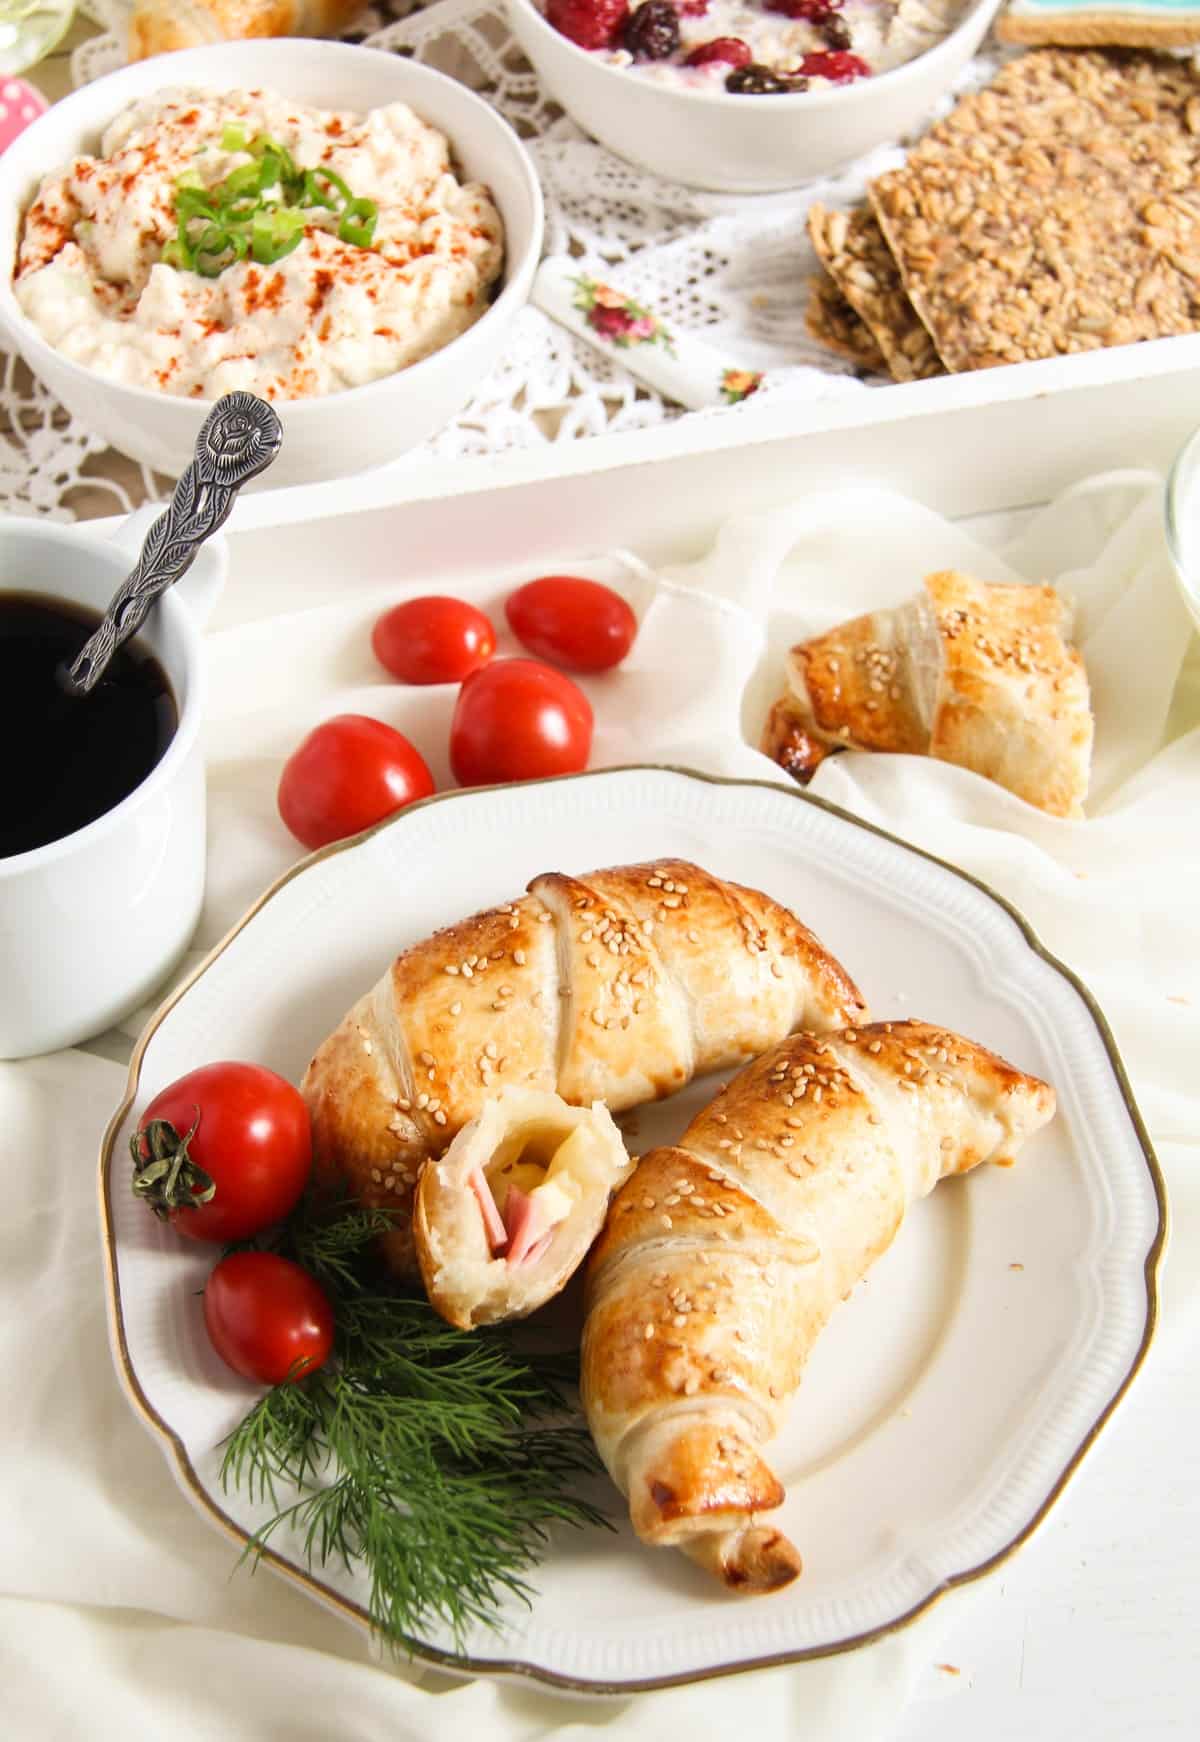 plate with croissants, cherry tomates, coffee and cheese spread for brunch.